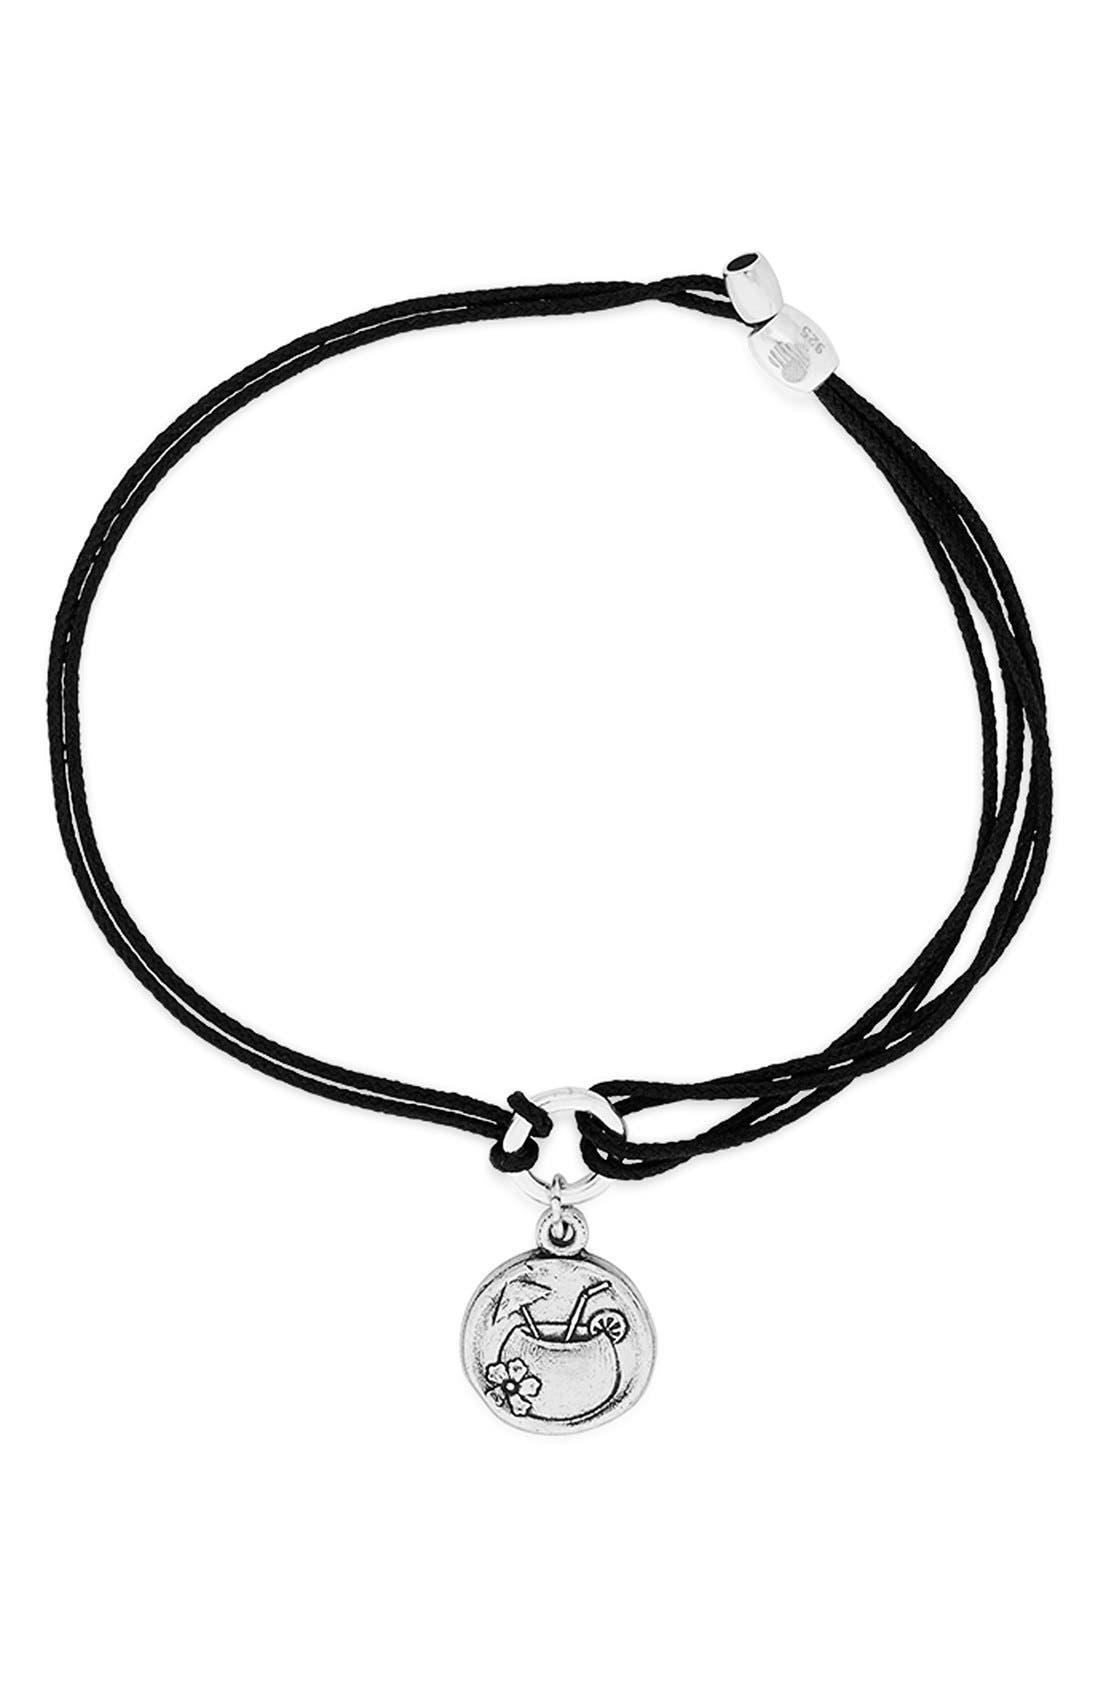 Alex And Ani Kindred Cord Tropical Drink Charm Bracelet In Silver Finish